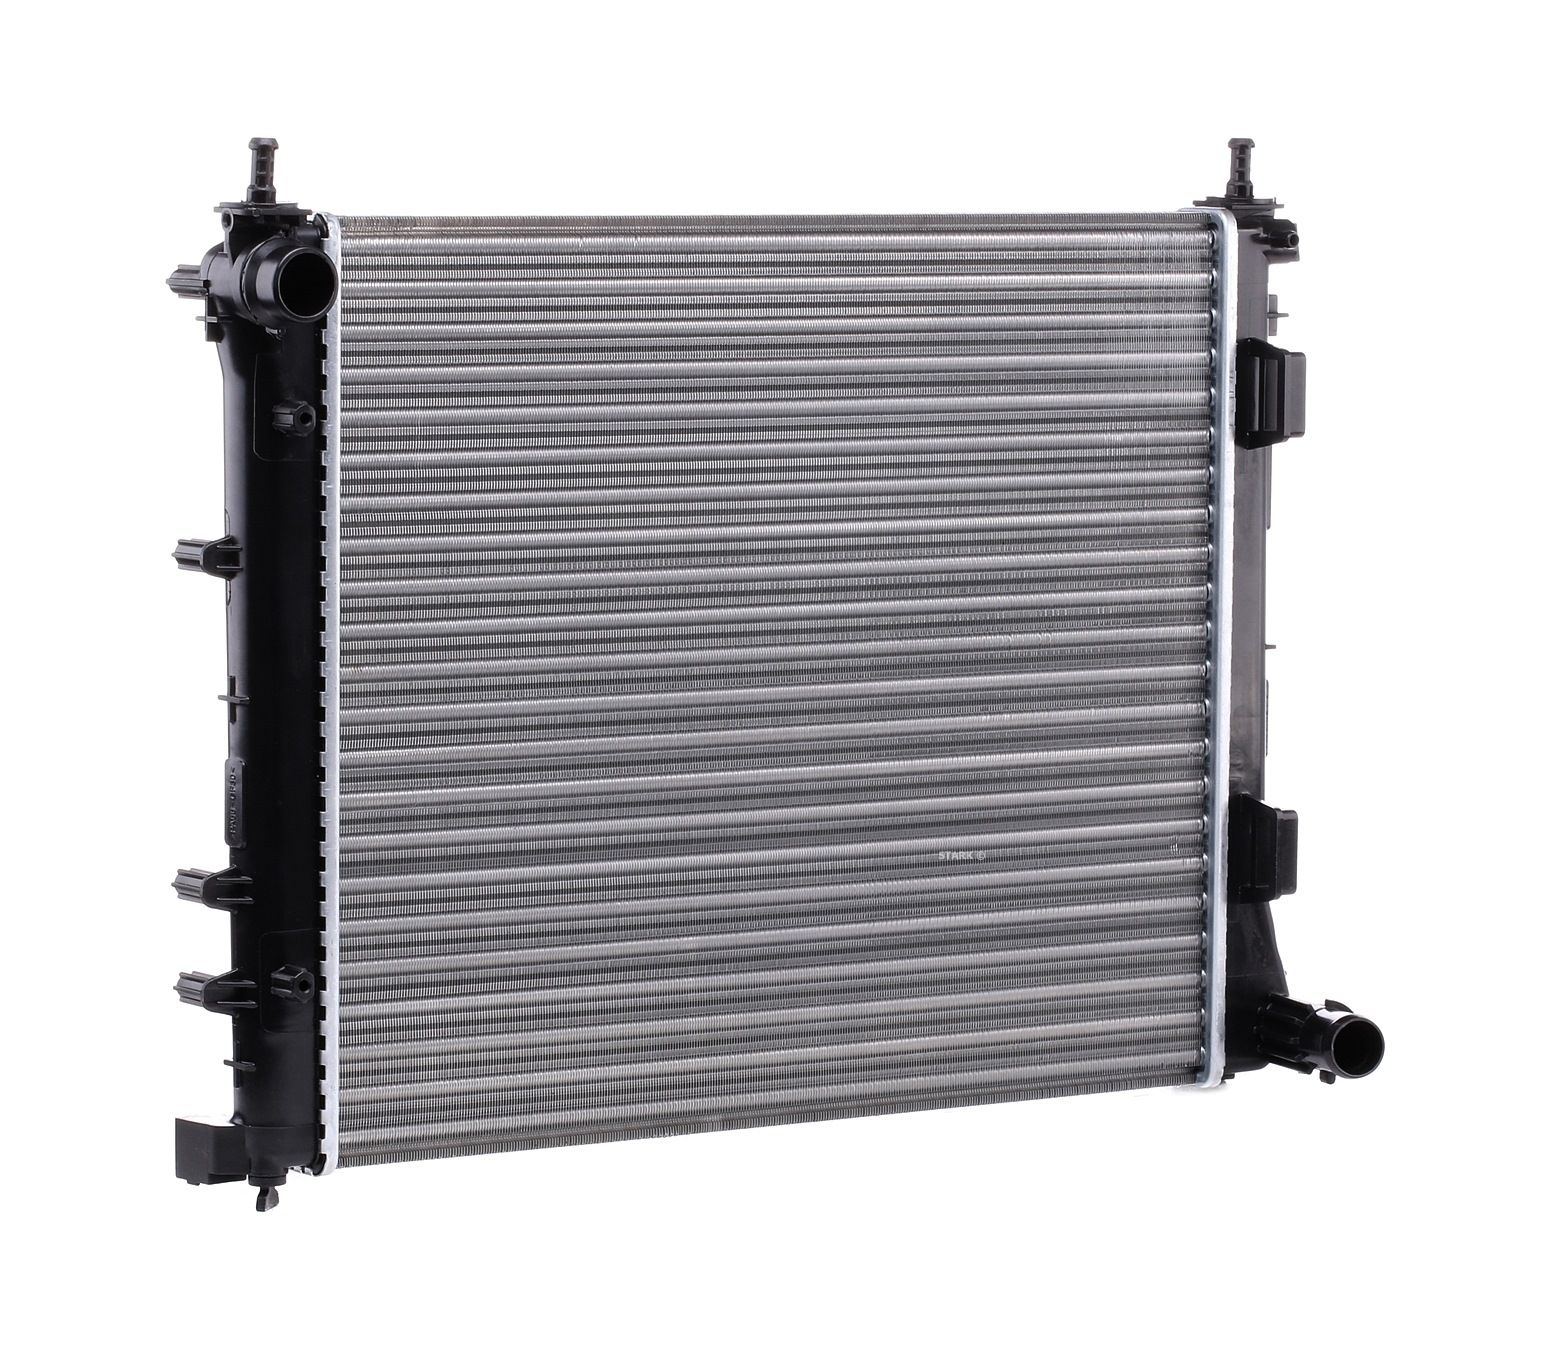 STARK SKRD-0120532 Engine radiator Aluminium, for vehicles with/without air conditioning, Manual Transmission, Mechanically jointed cooling fins